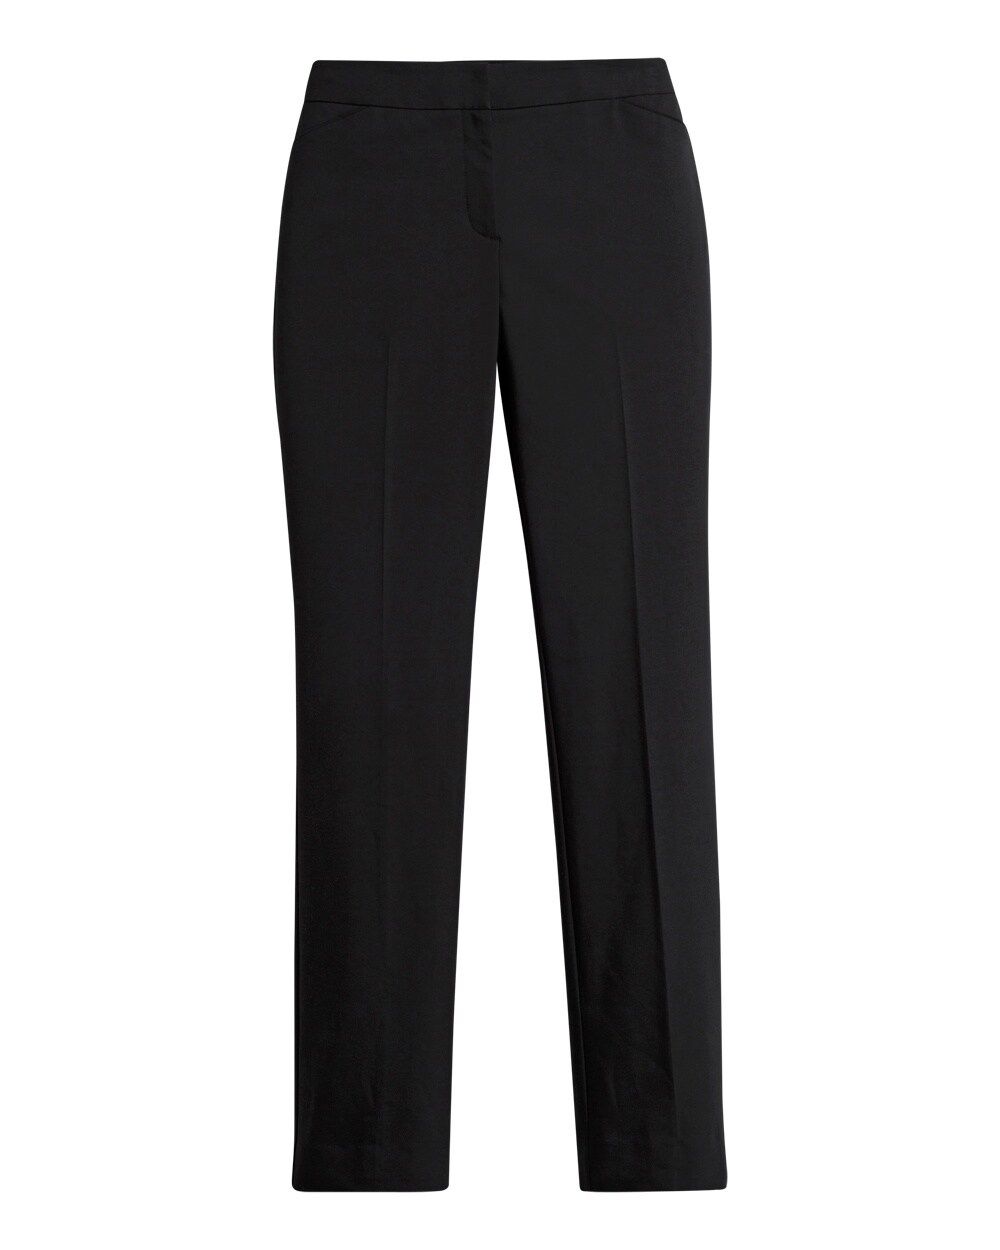 So Slimming Grace Pants - Women's Clothing, Jewelry & More - New ...